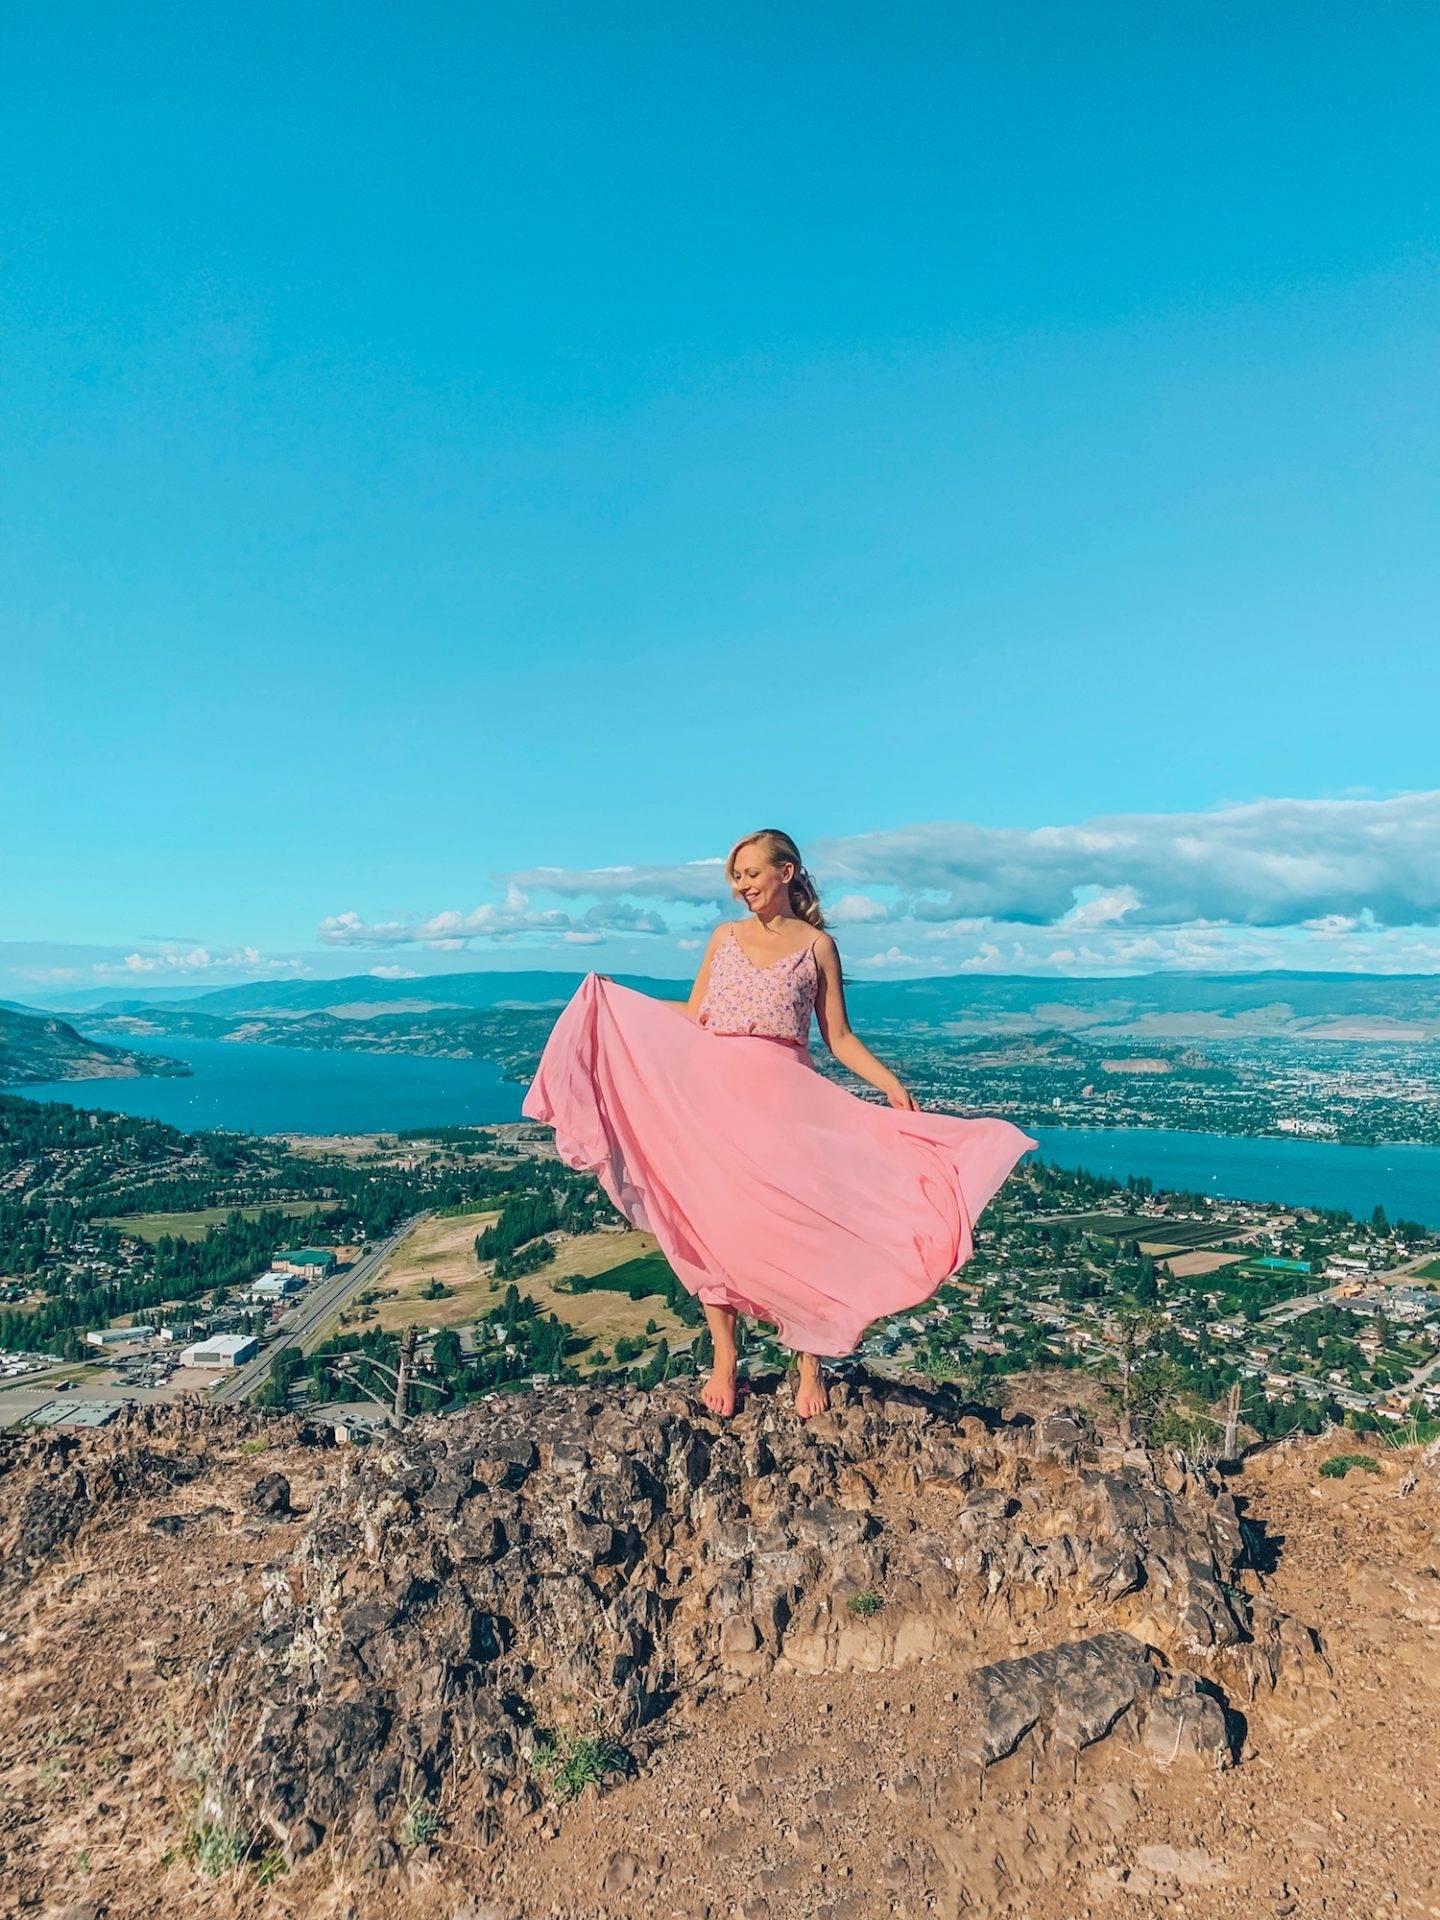 Planning a trip to Kelowna soon? This guide covers all the best things to do in Kelowna from a locals perspective! From wineries and cideries, to adventure activities, hikes, waters sports and more. This guide has everything you need to plan your visit to beautiful Kelowna! Pictured here: Hike to the top of Mount Boucherie